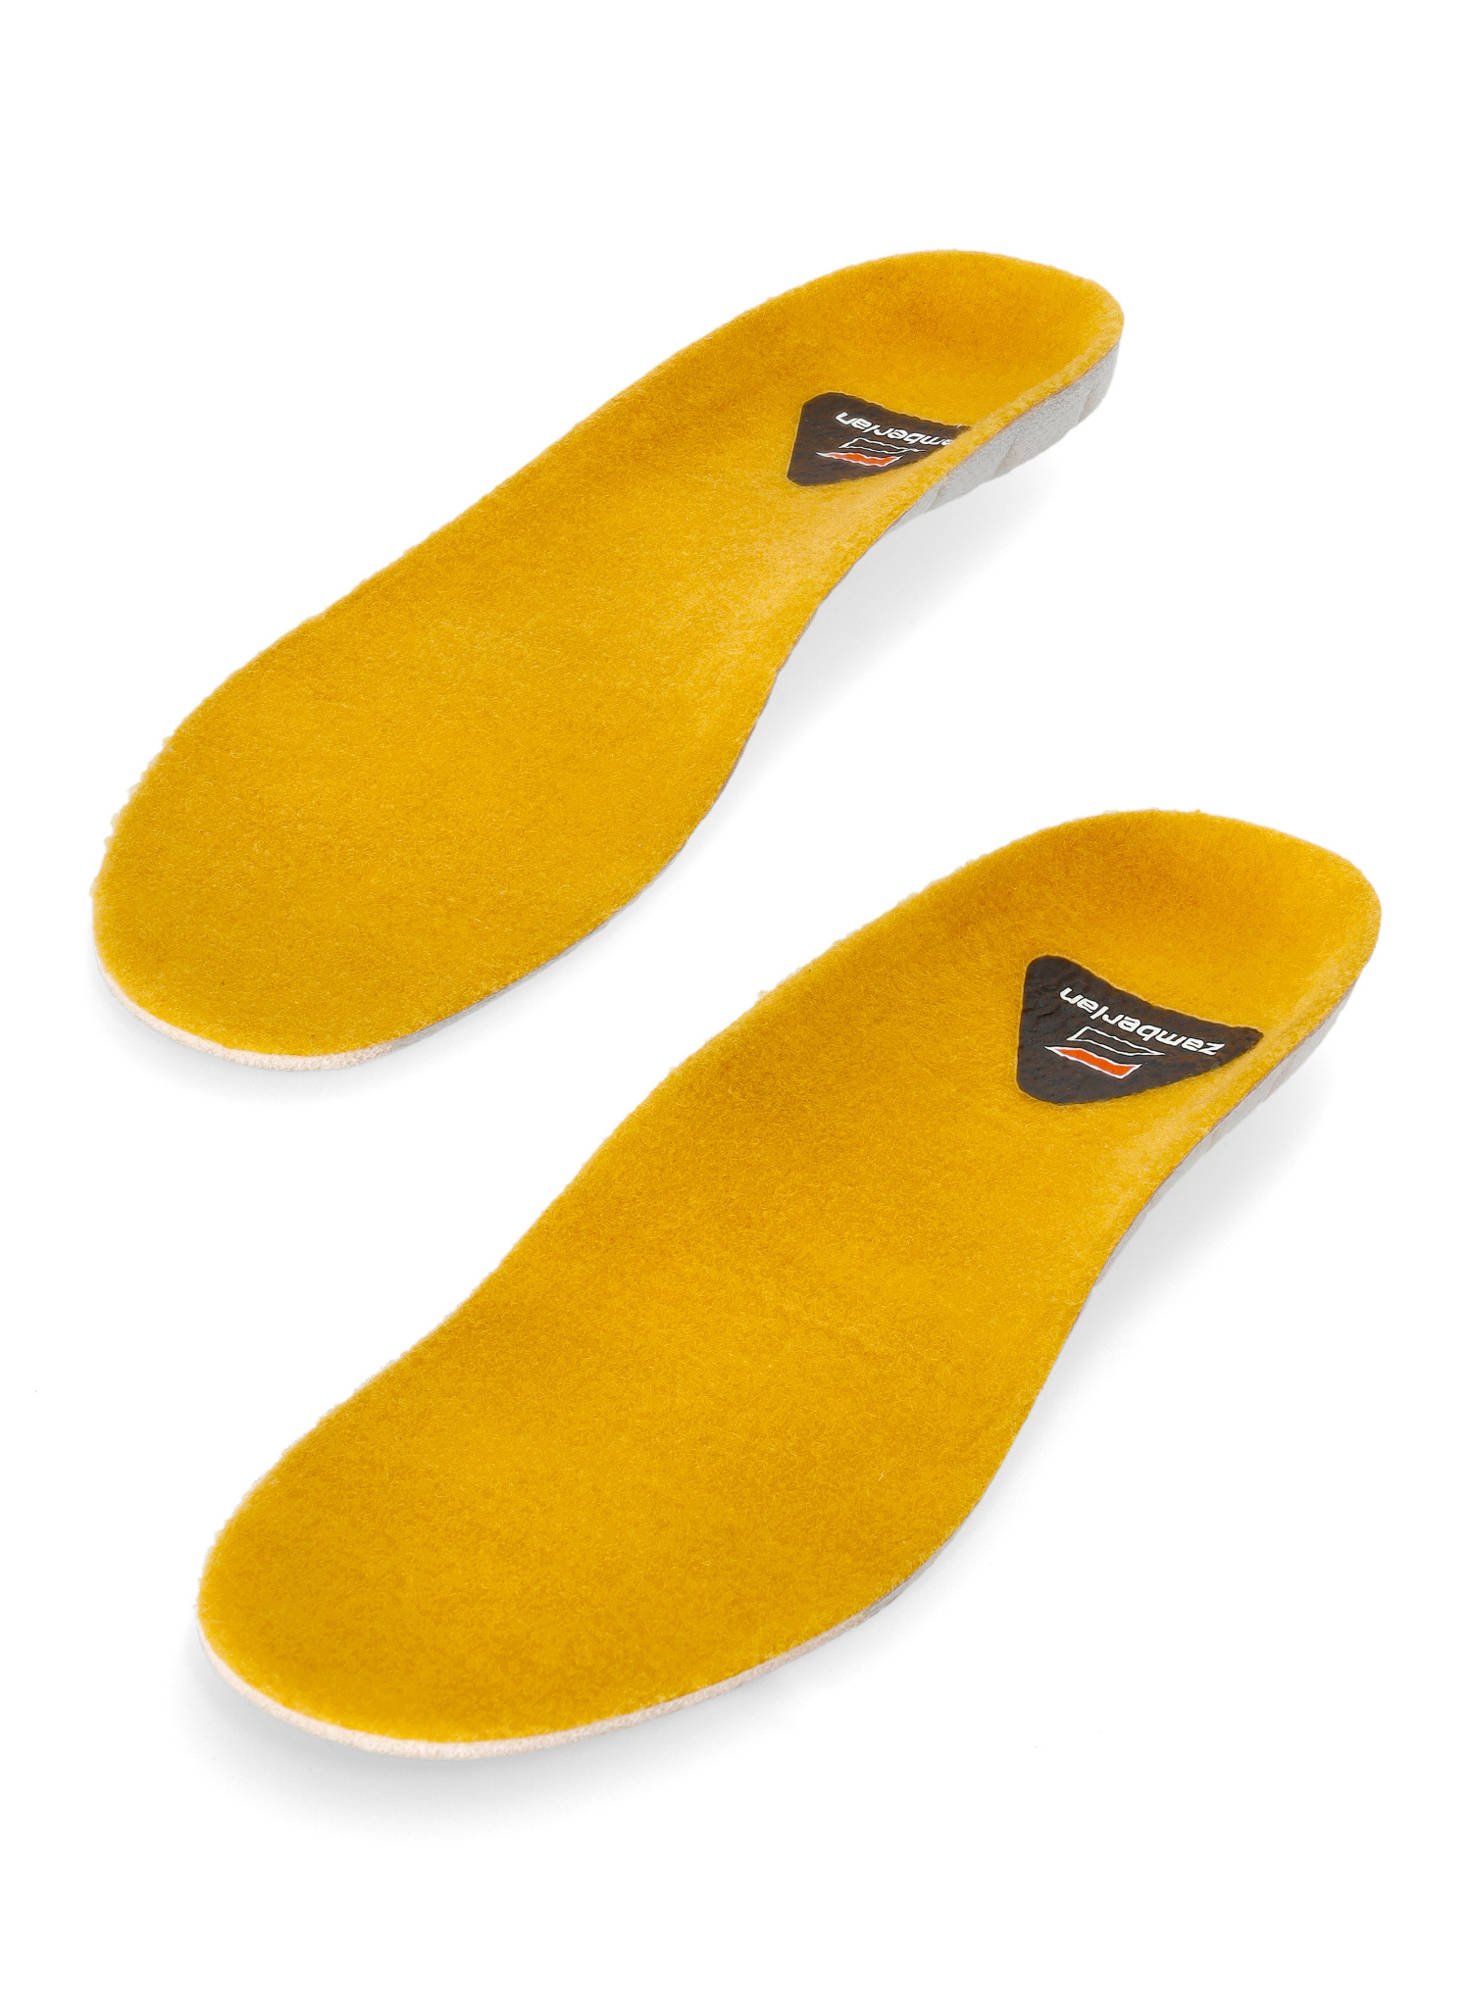 Zamberlan Italian insoles absorb sweat, wick away moisture and absorb shock  for outdoor sports insoles